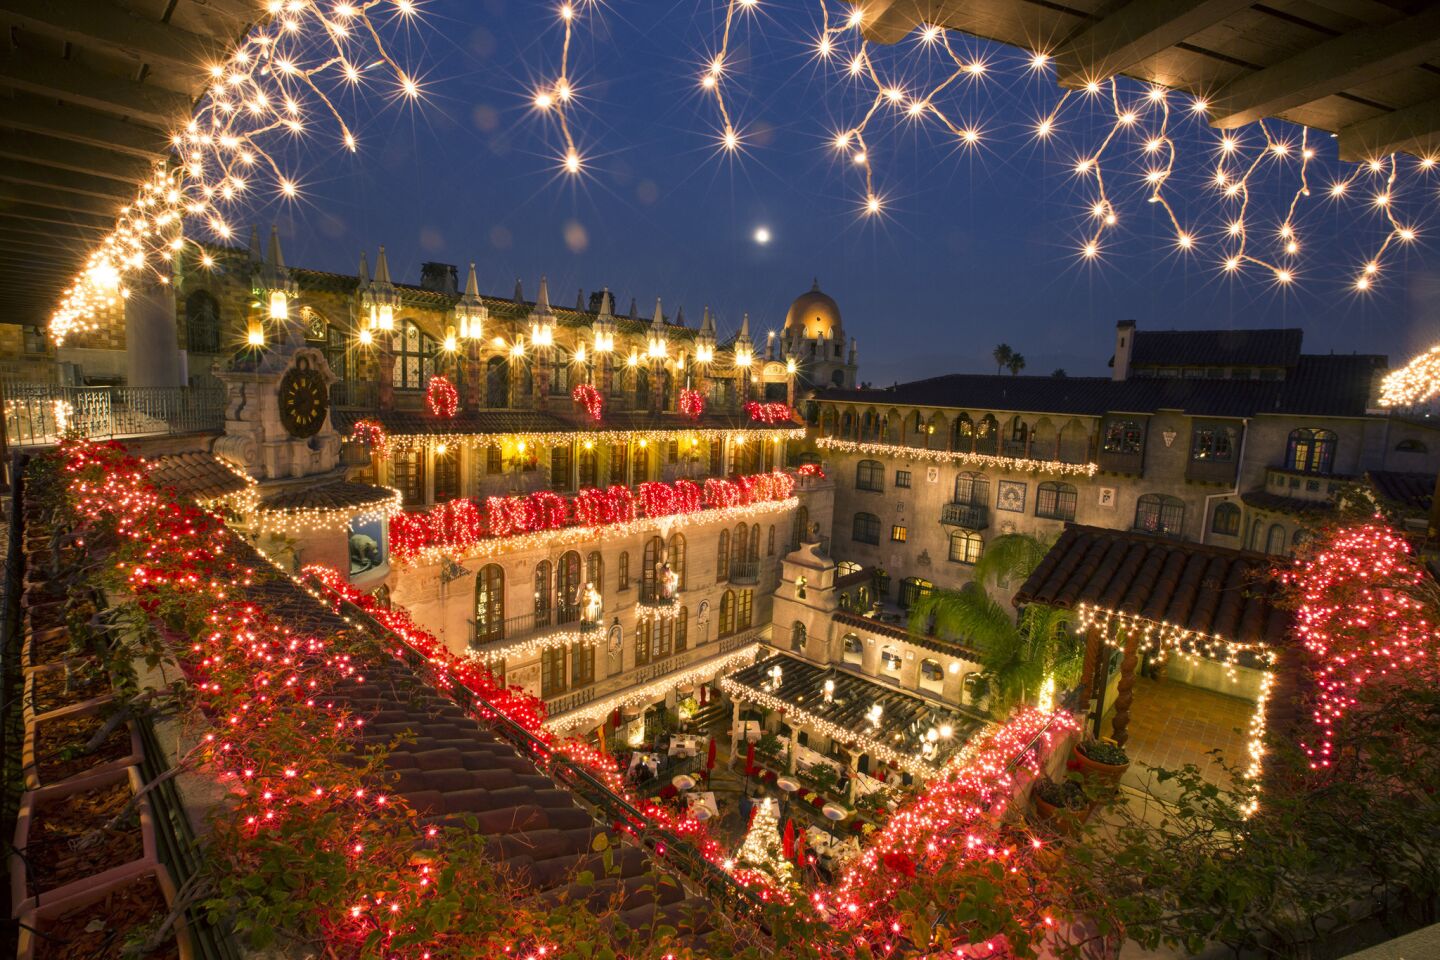 Quick getaway to Mission Inn in Riverside